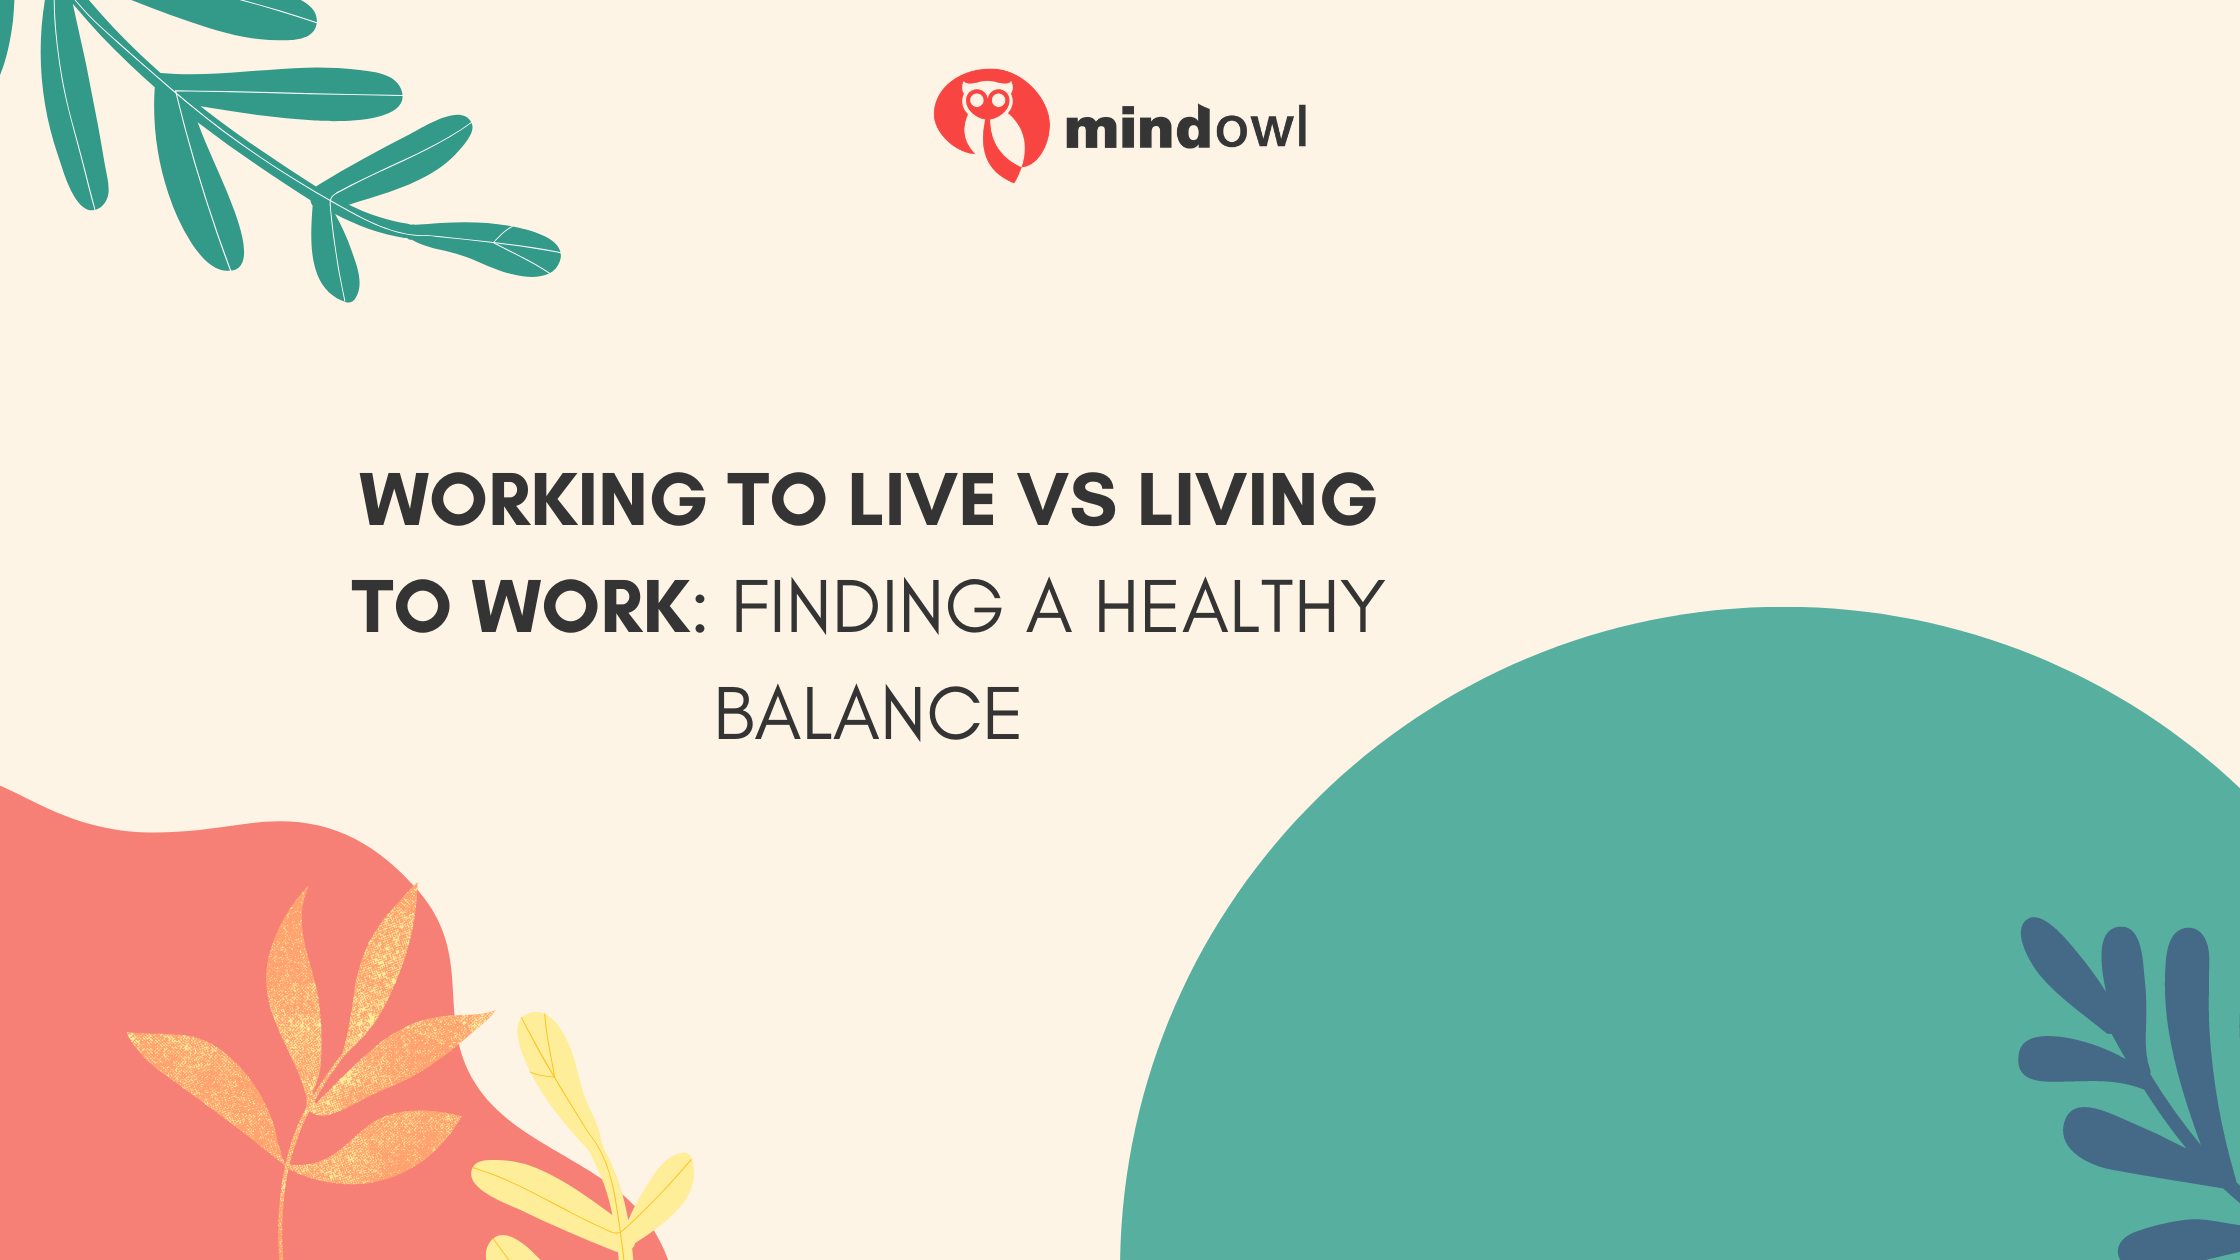 Working to Live vs Living to Work: Finding a Healthy Balance